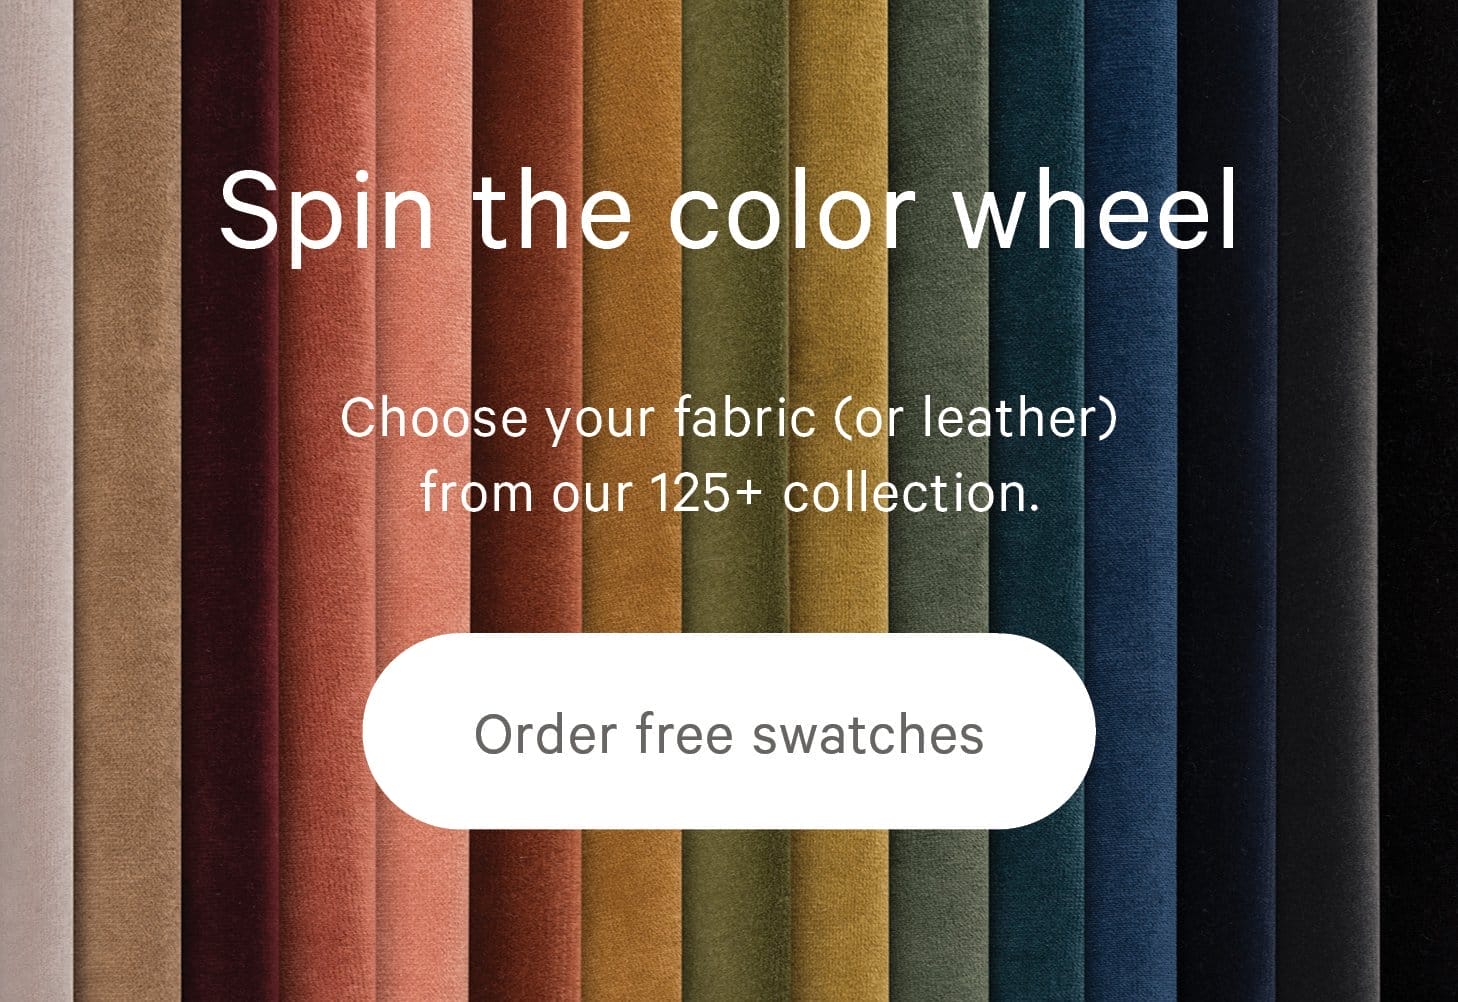 Choose your fabric (or leather) from our 125+ collection.